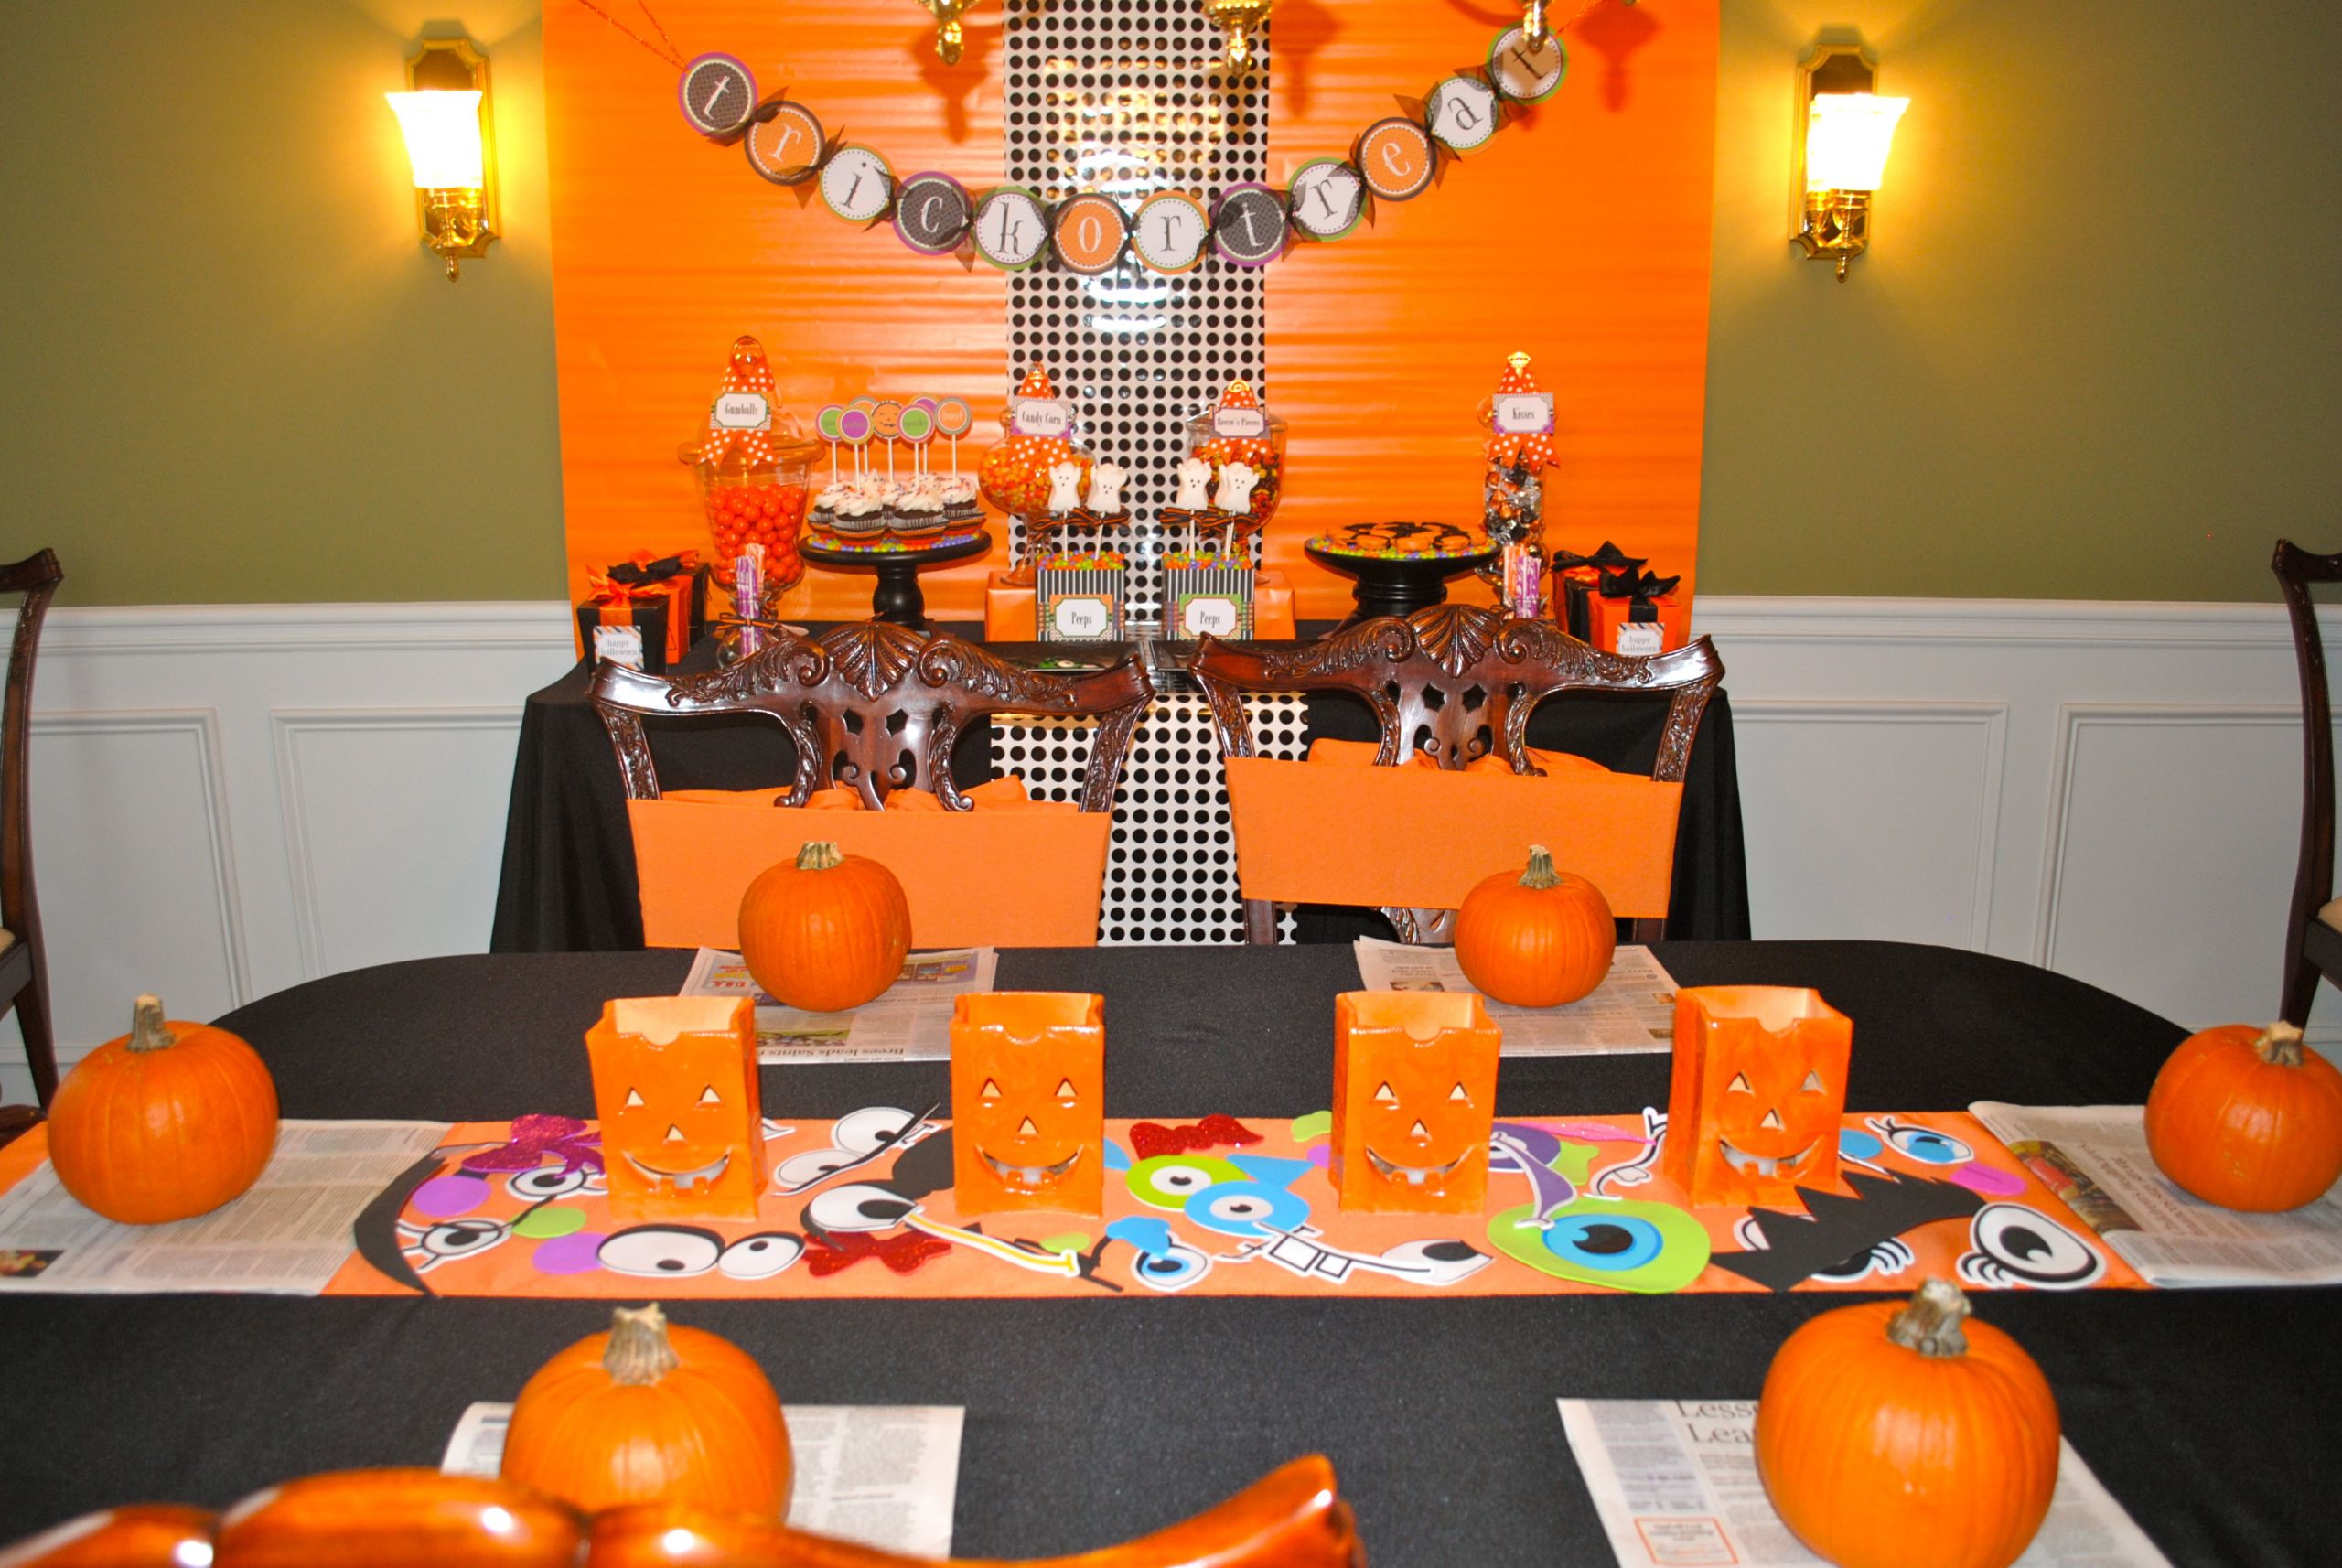 Halloween Party Theme Ideas For Adults
 Halloween Party Ideas For Kids 2019 With Daily